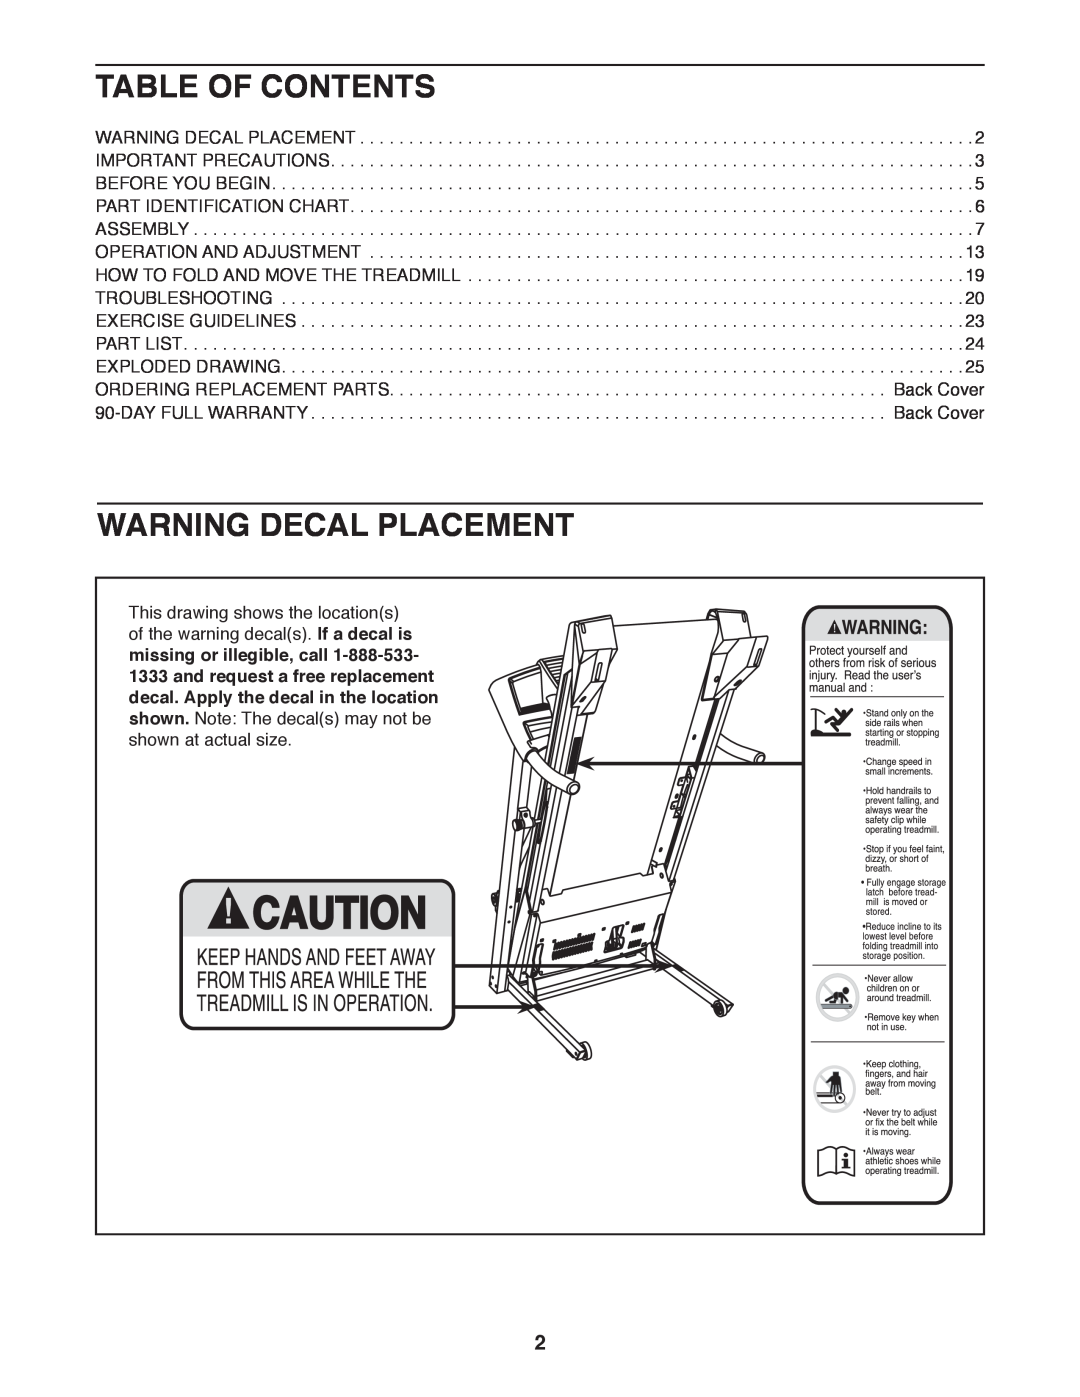 ProForm 397 user manual Table Of Contents, Warning Decal Placement 